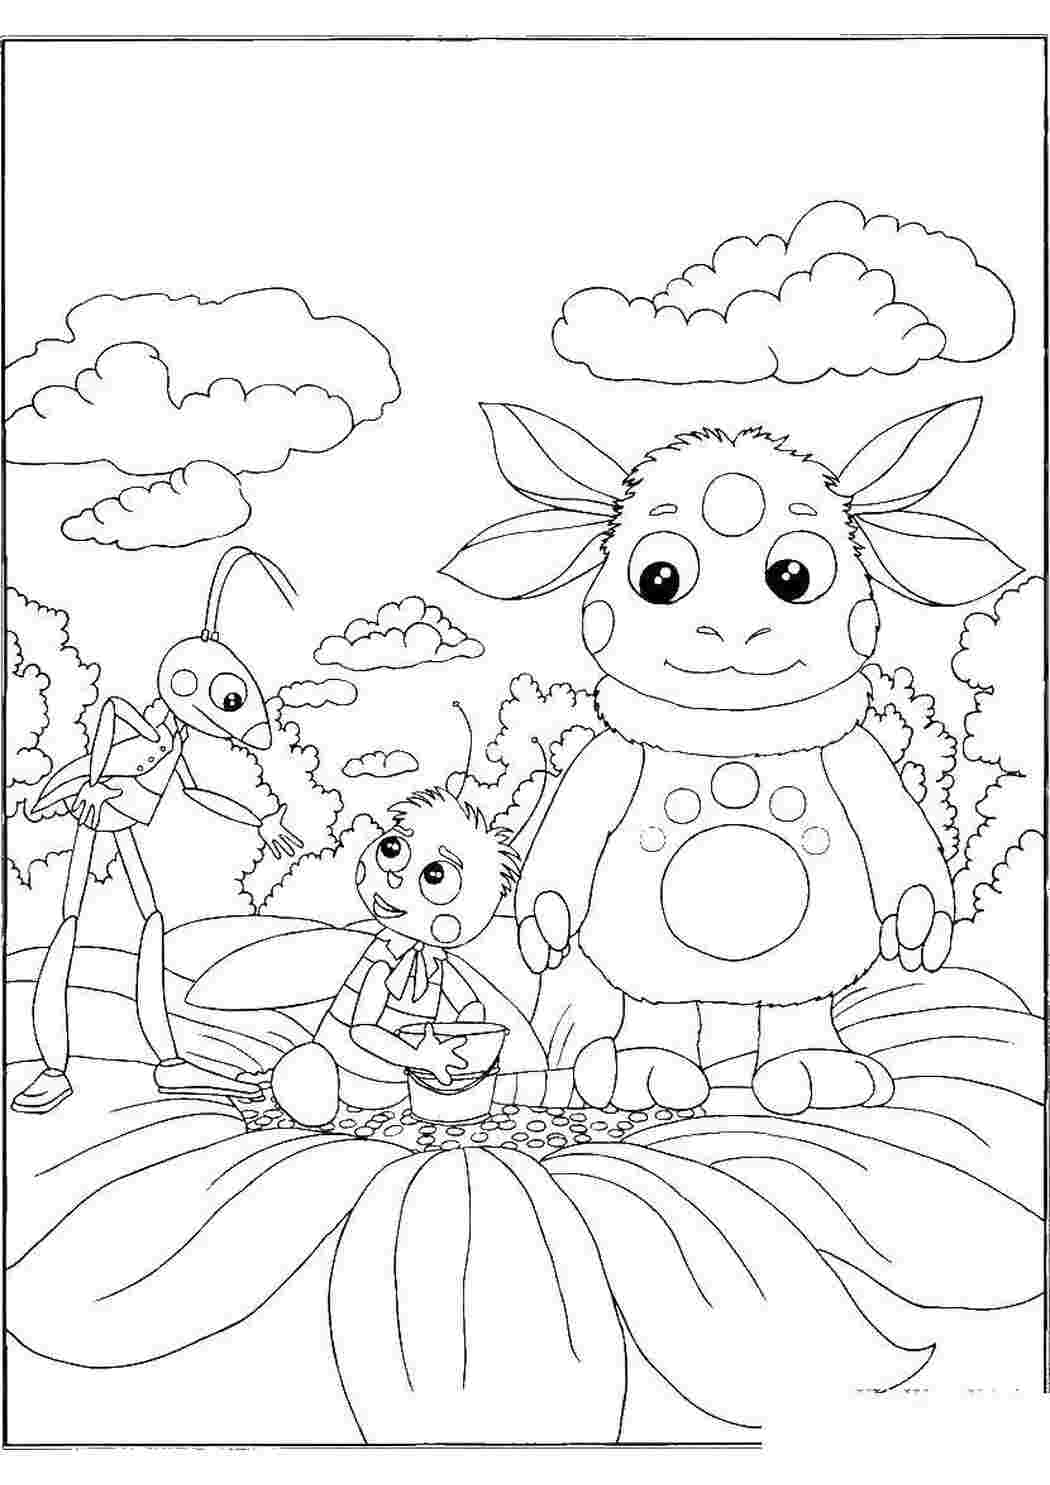 Coloring Luntik is the best coloring game.